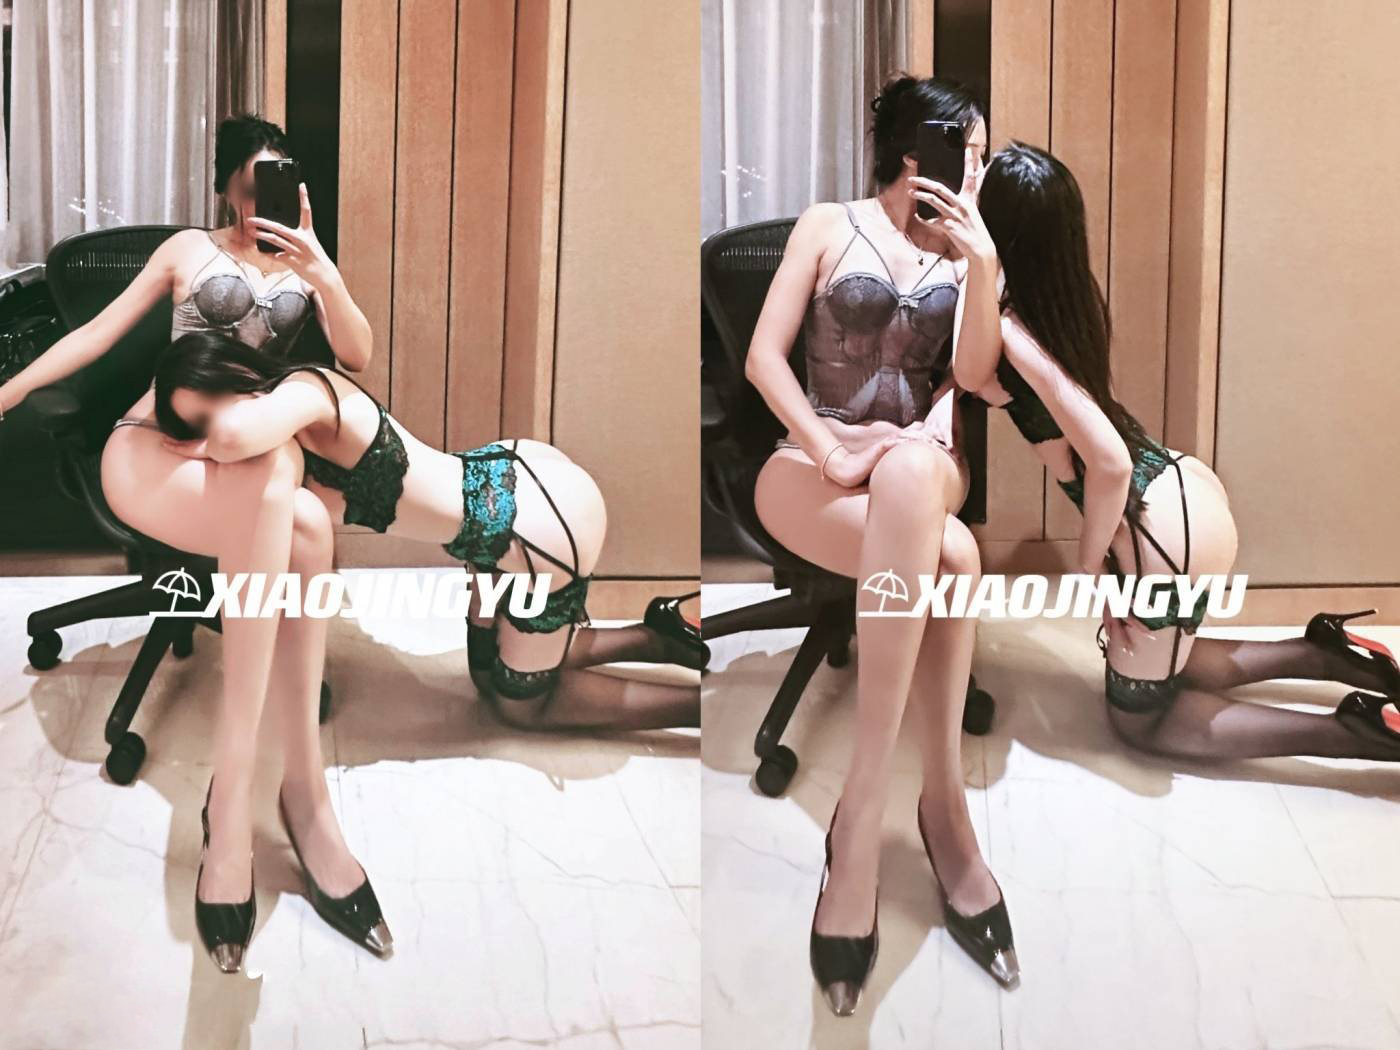 The Twitter celebrity human high quality sex couple "Little Whale" and "Manfei Xiaoyu" are in a private photo shoot, and the scene of mutual penetration and mutual licking and tofu grinding is so sexy that it's not even funny.